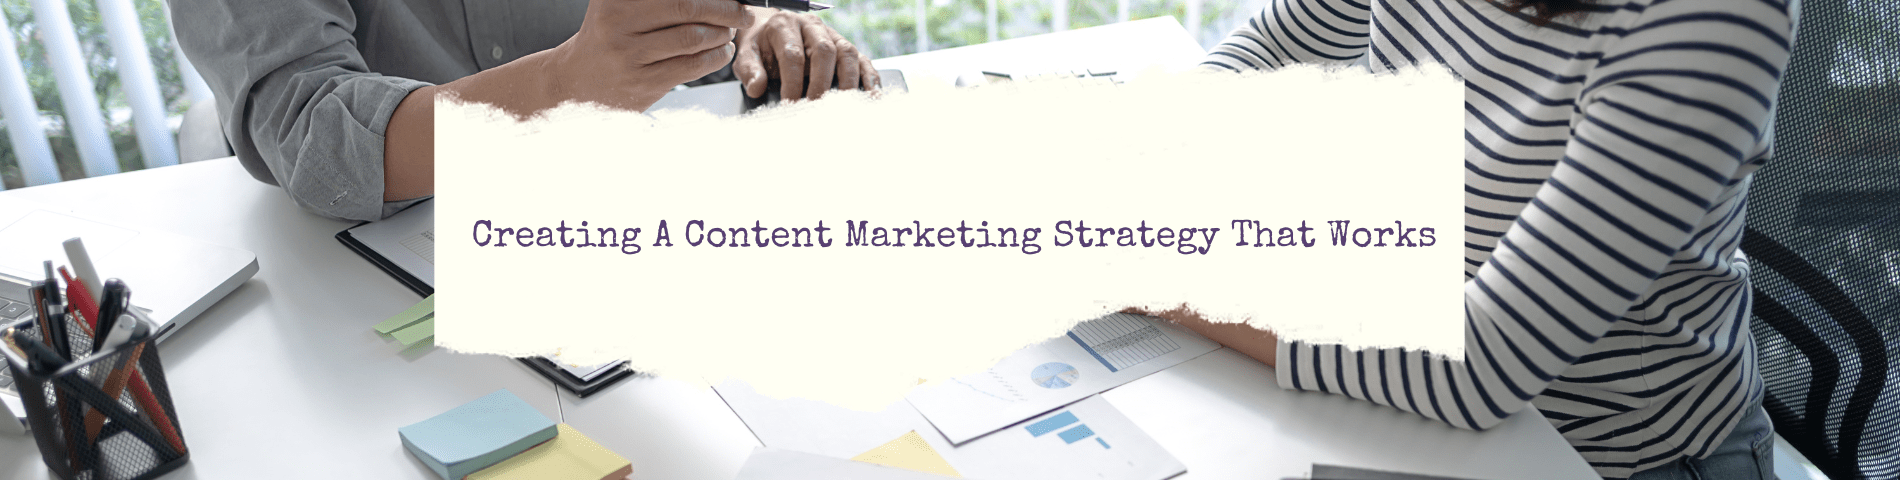 Creating a Content Marketing Strategy | Linguakey Blog